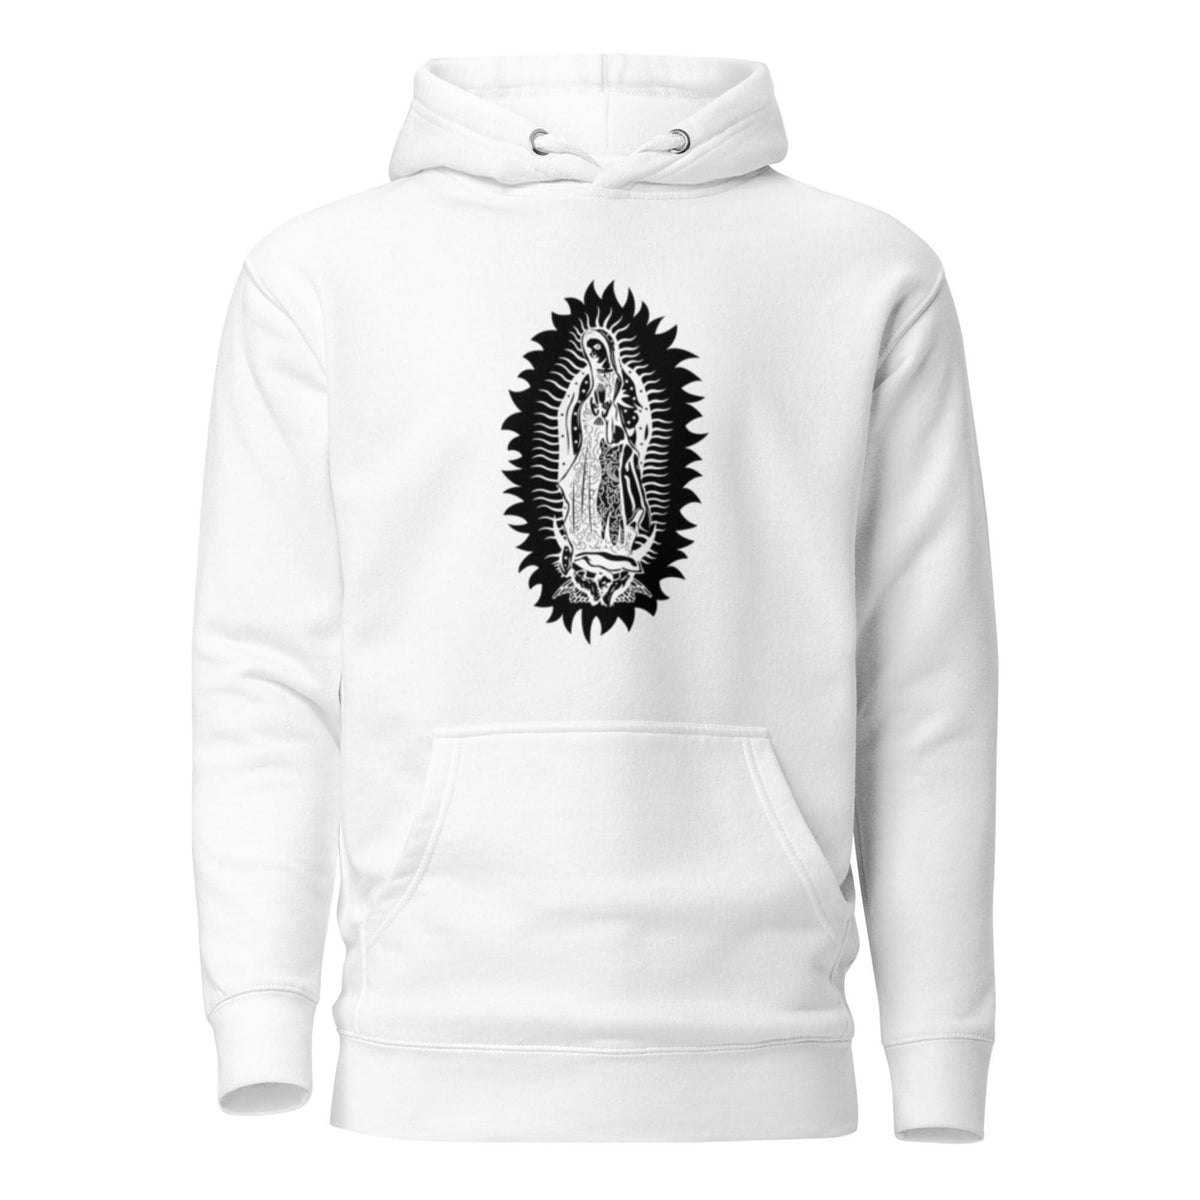 Our Lady Hoodie